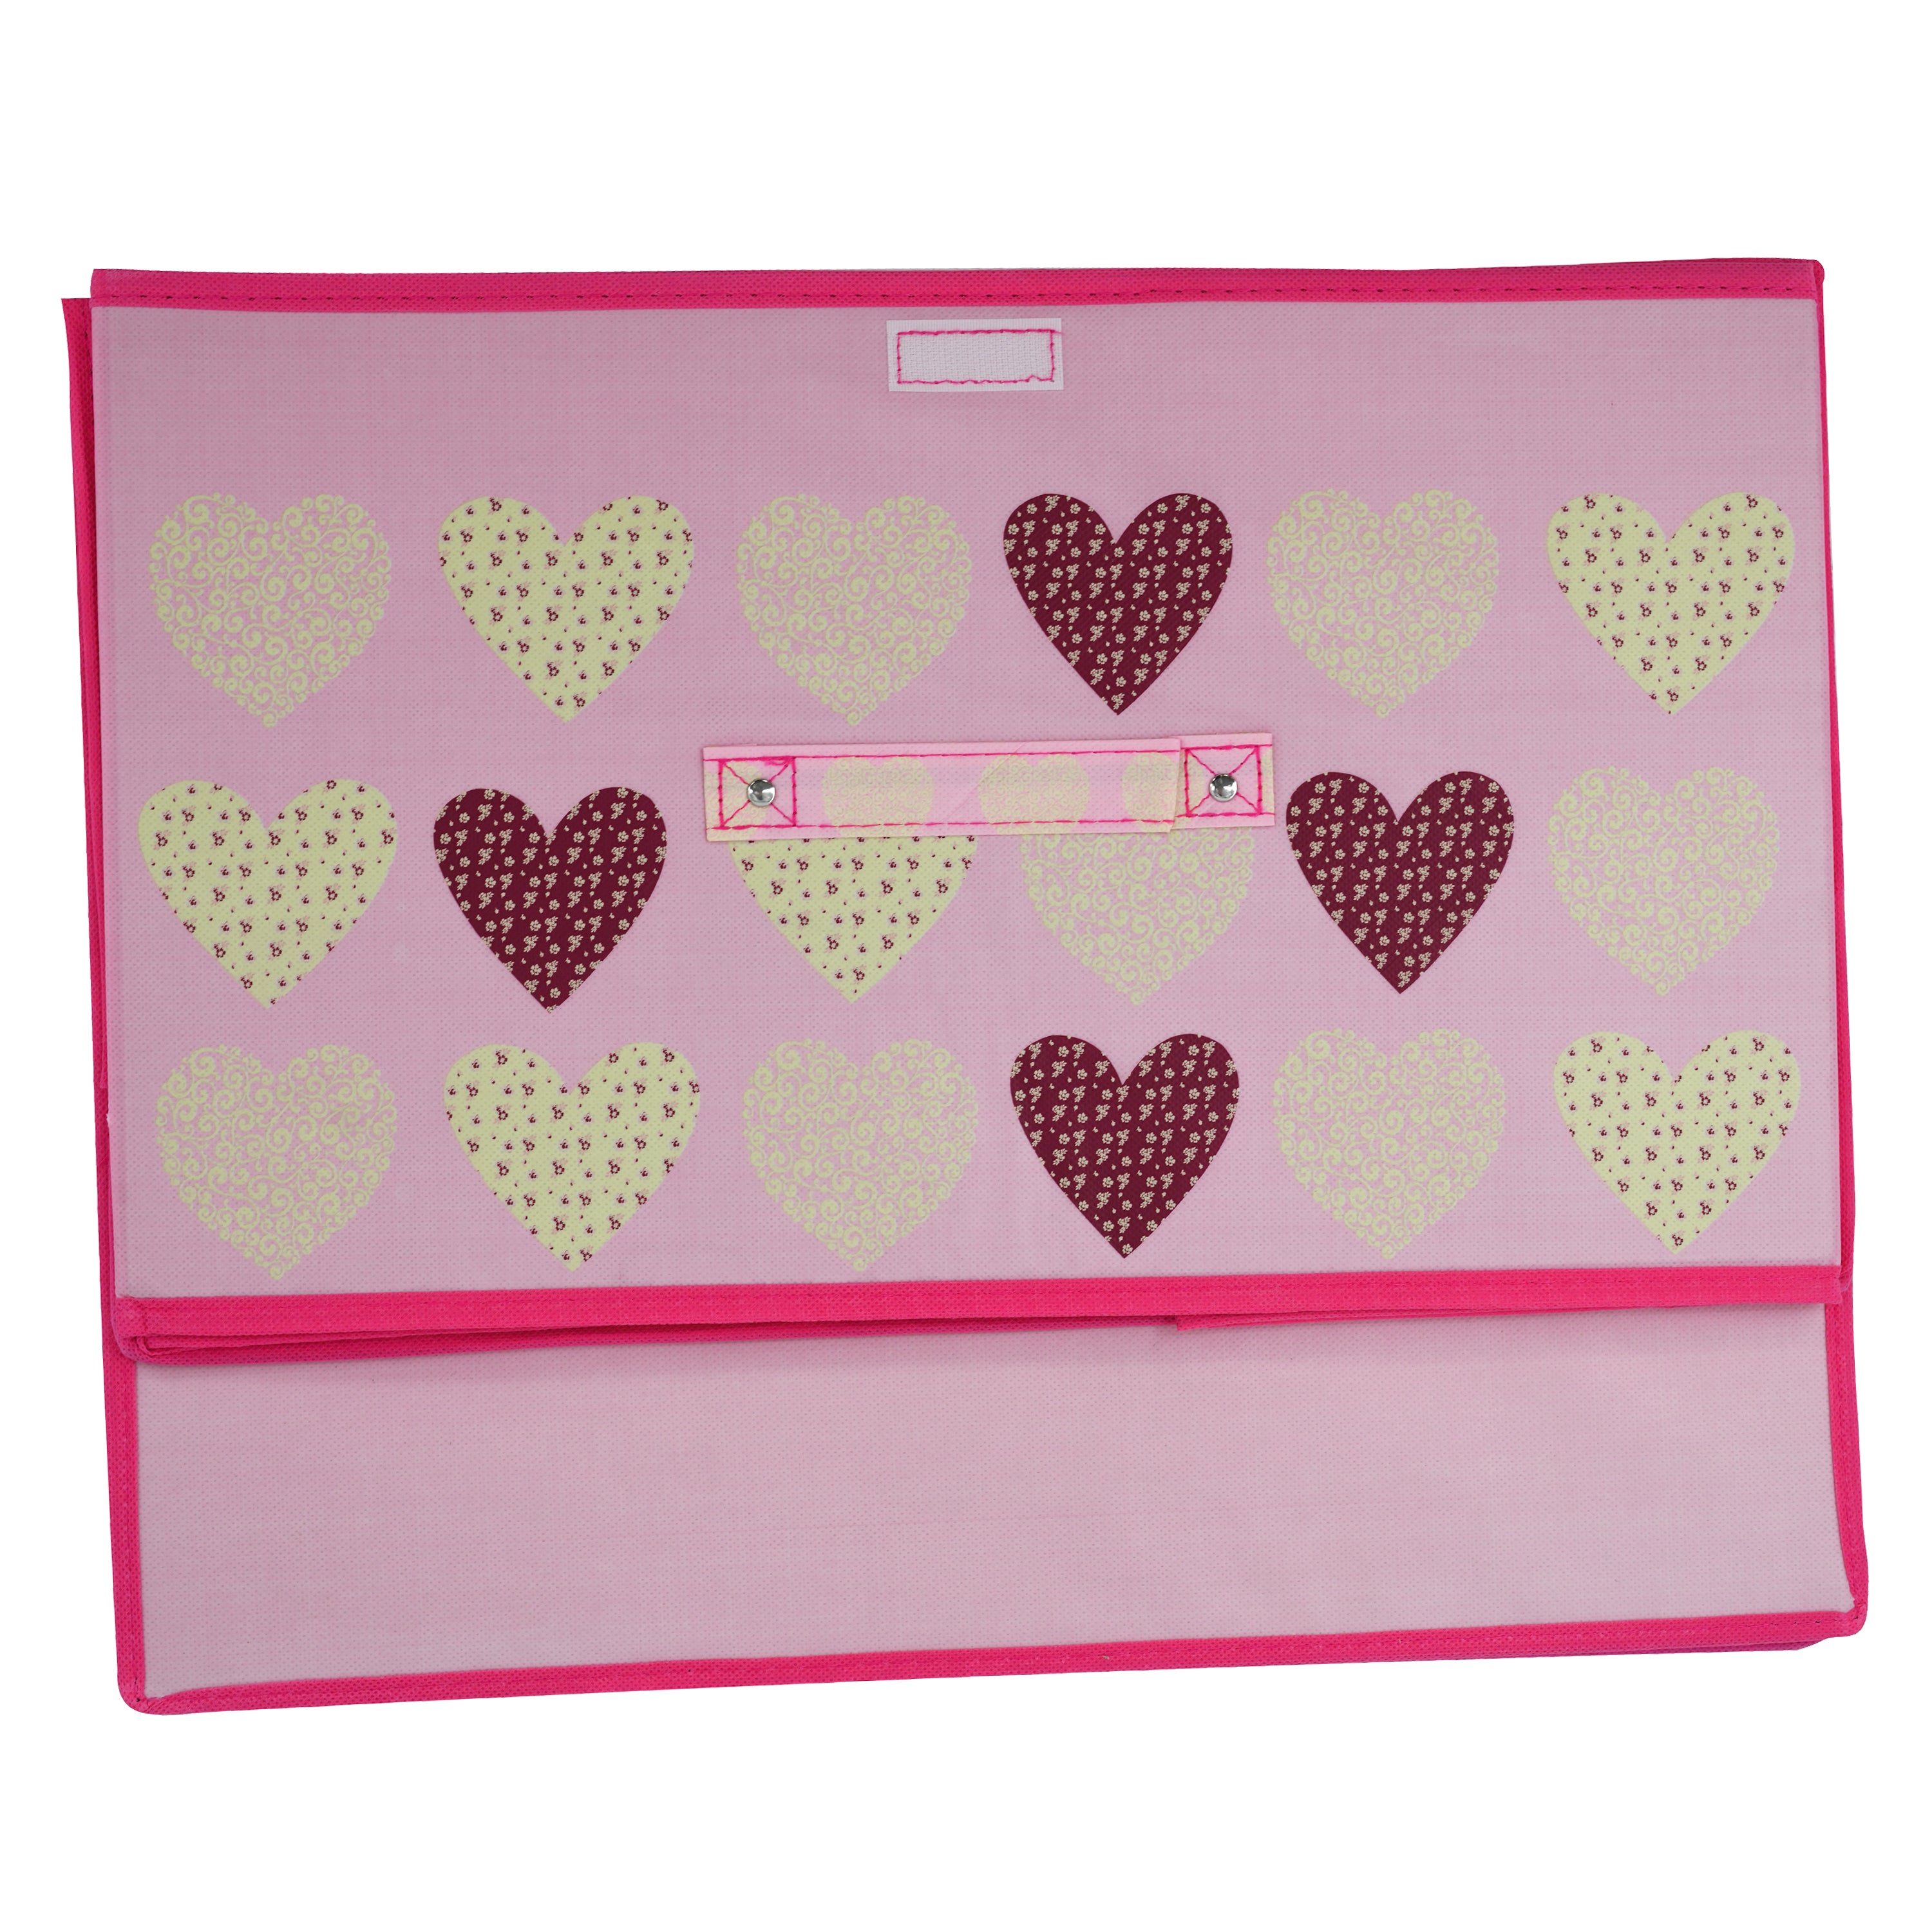 Pink Hearts Large Storage Box GEEZY - The Magic Toy Shop